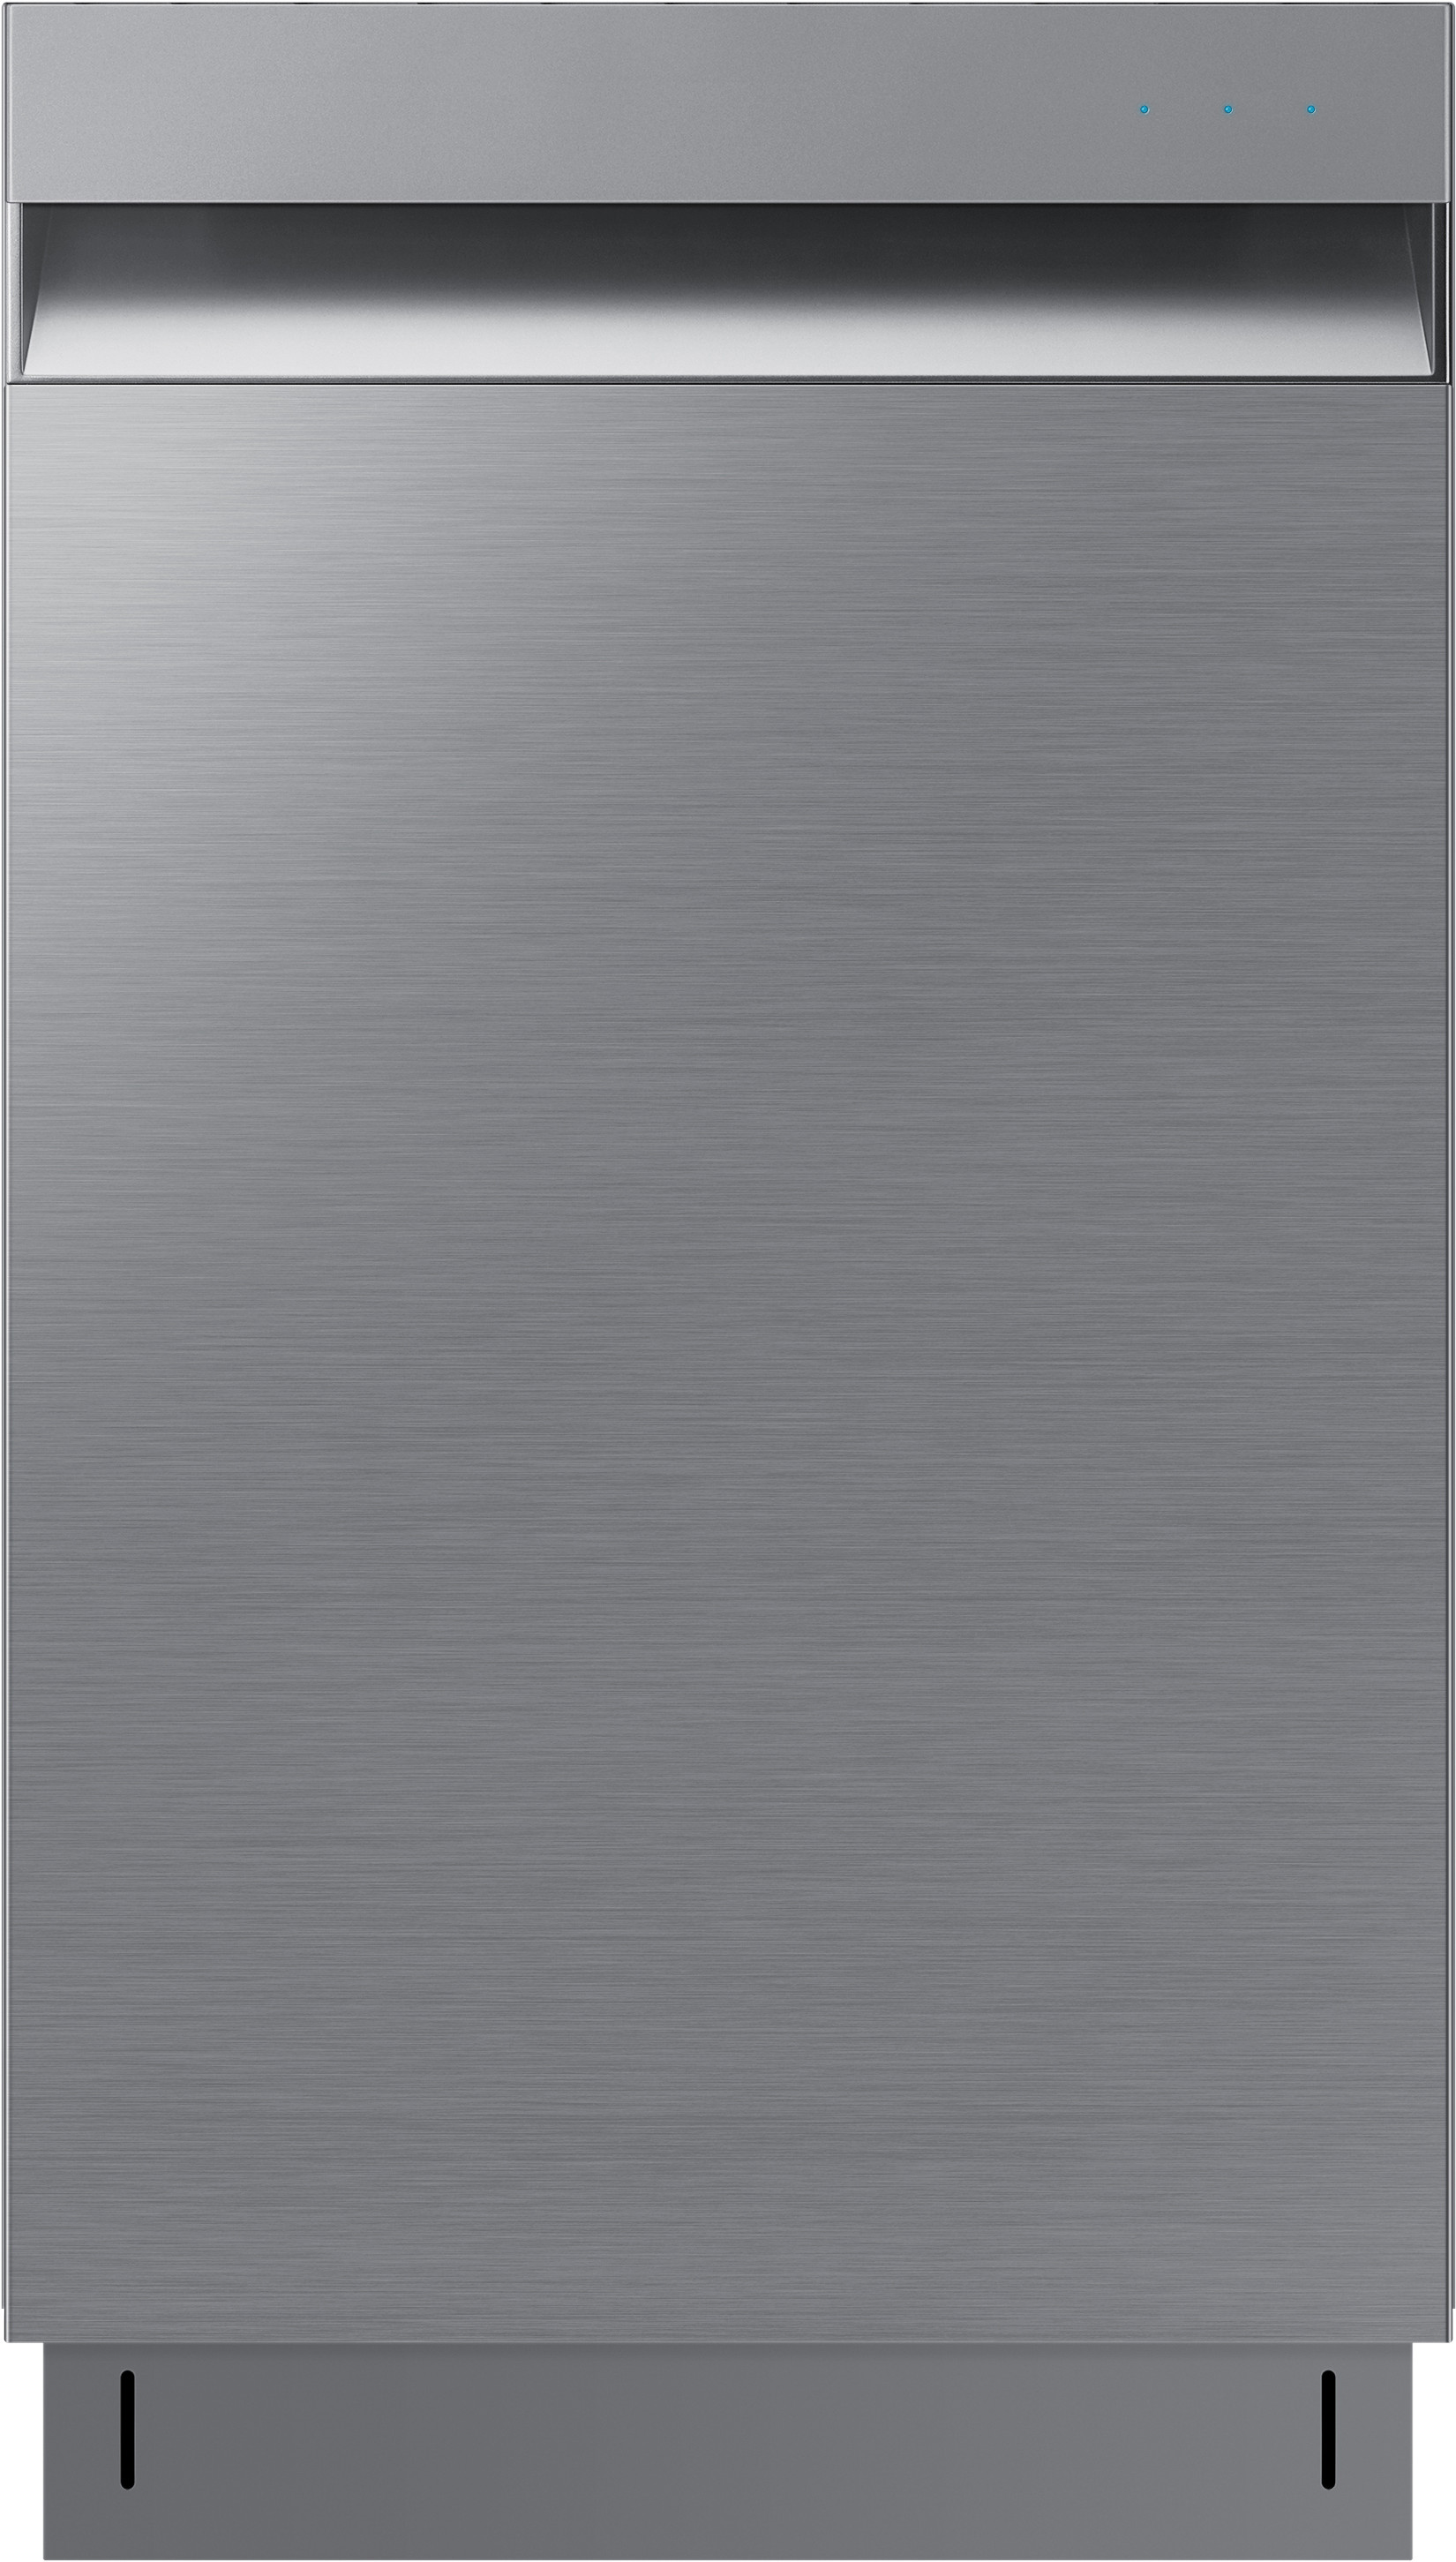 18"" Fully Integrated Built In Dishwasher - Samsung DW50T6060US